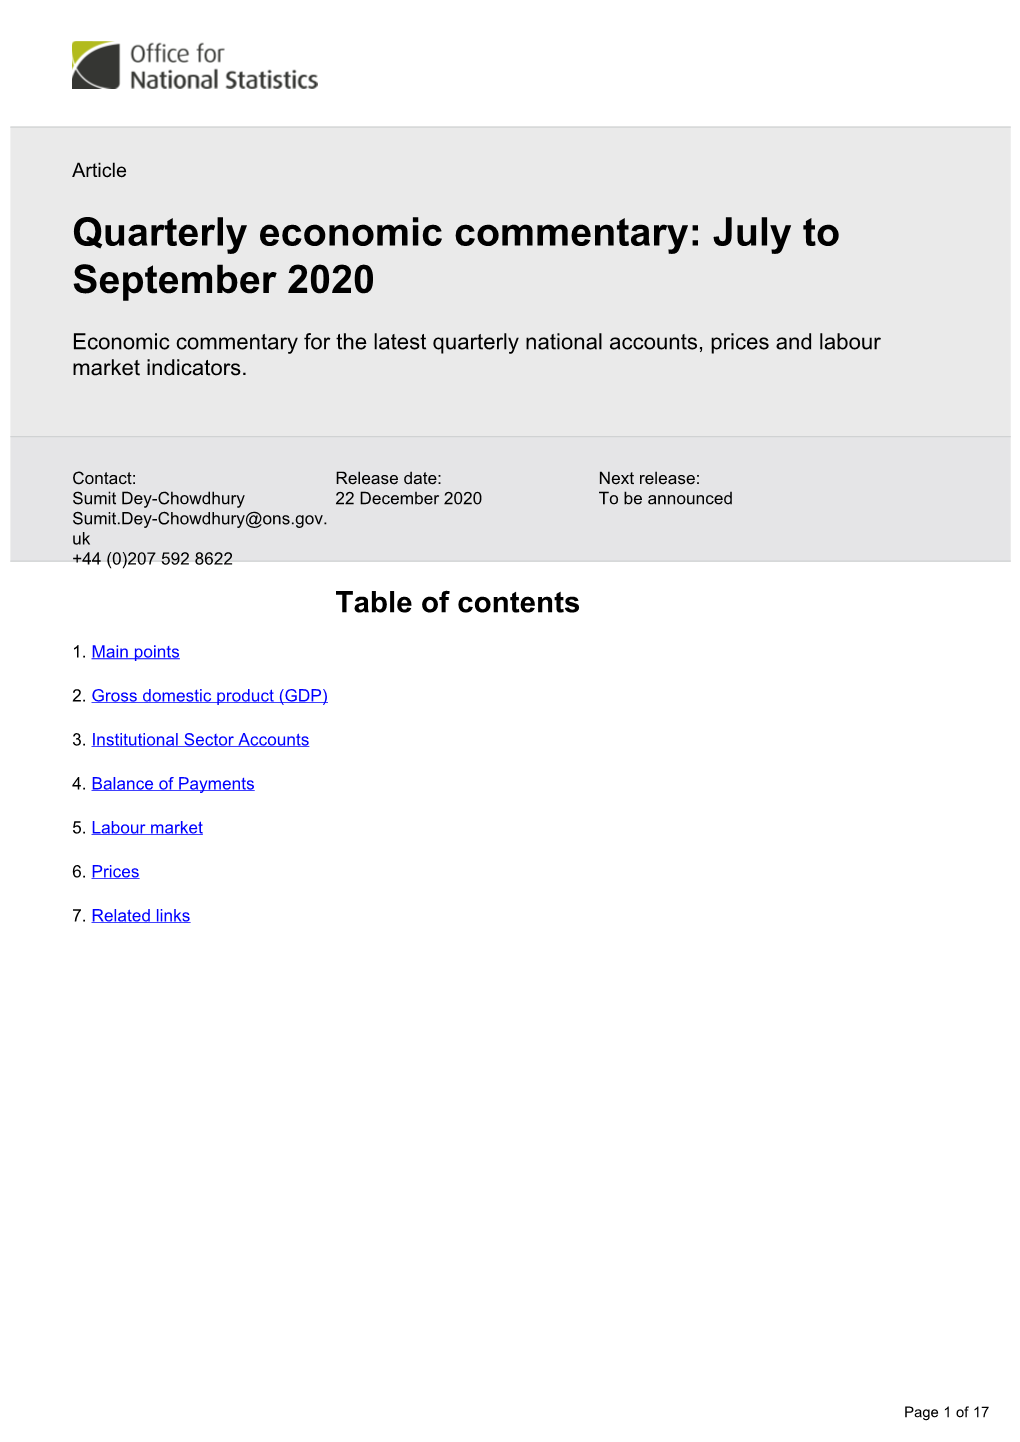 Quarterly Economic Commentary: July to September 2020